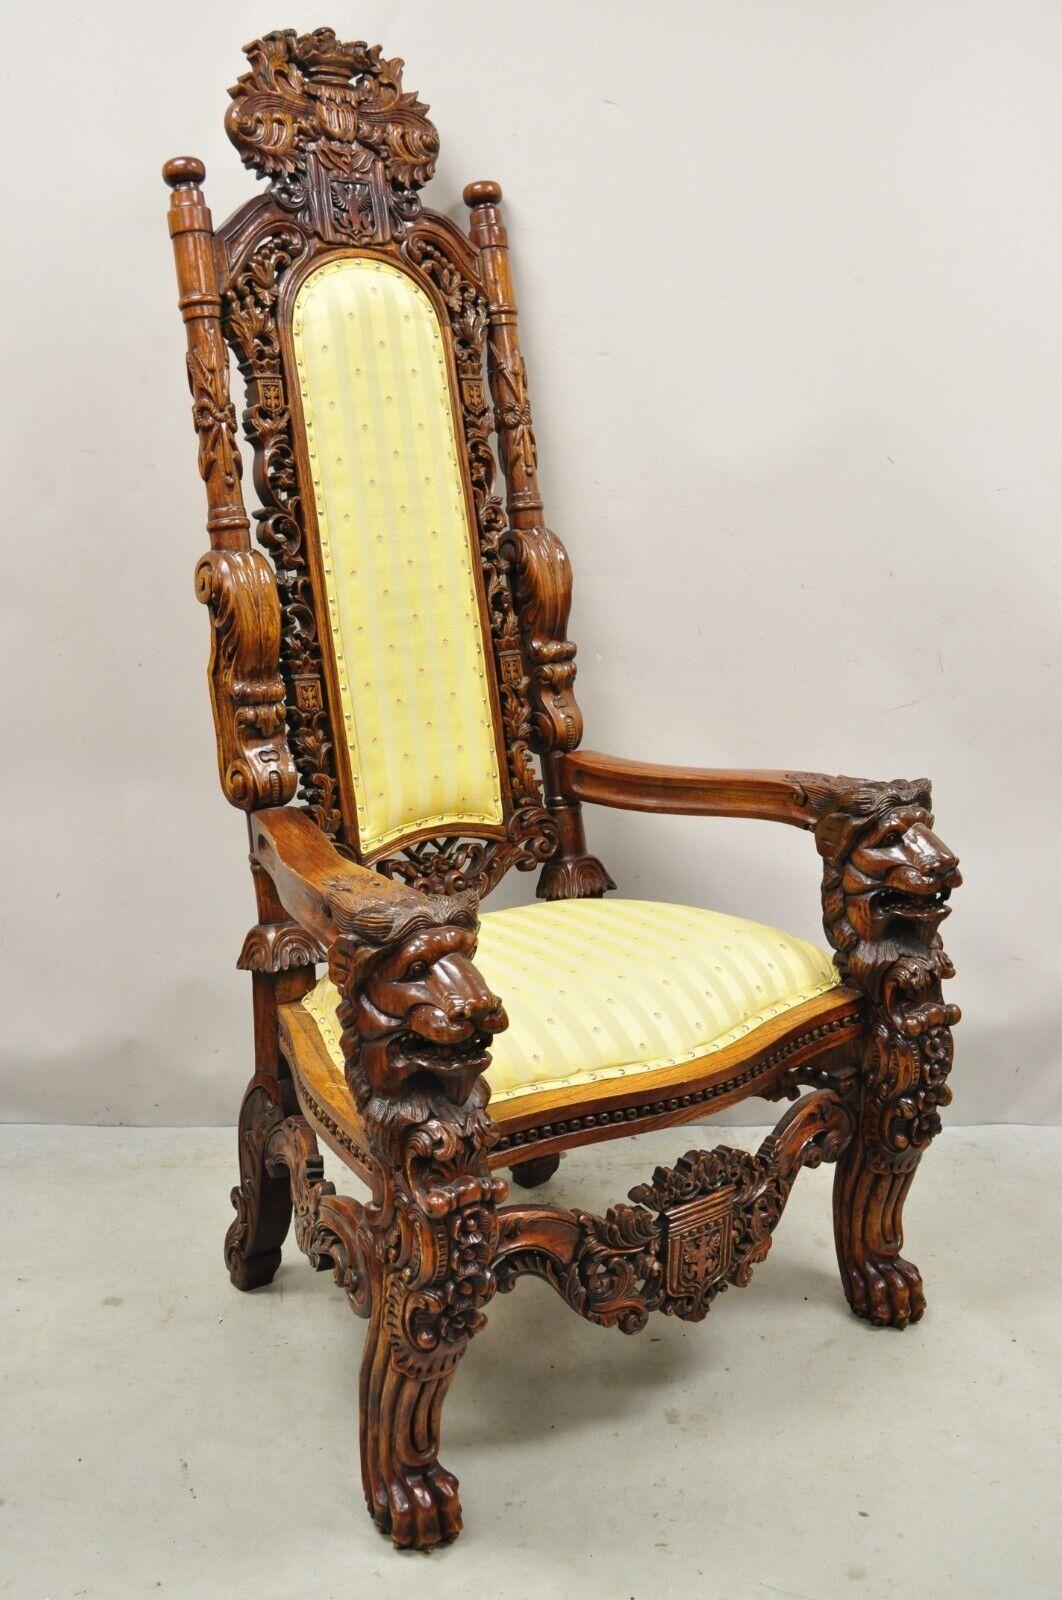 Large Renaissance Style Figural Lion Carved Wood Paw Feet Throne Chair. Item features a large impressive size, ornate lion heads and paw feet, nicely carved details, very nice item, great style and form. Circa Late 20th Century.
Measurements:  66.5